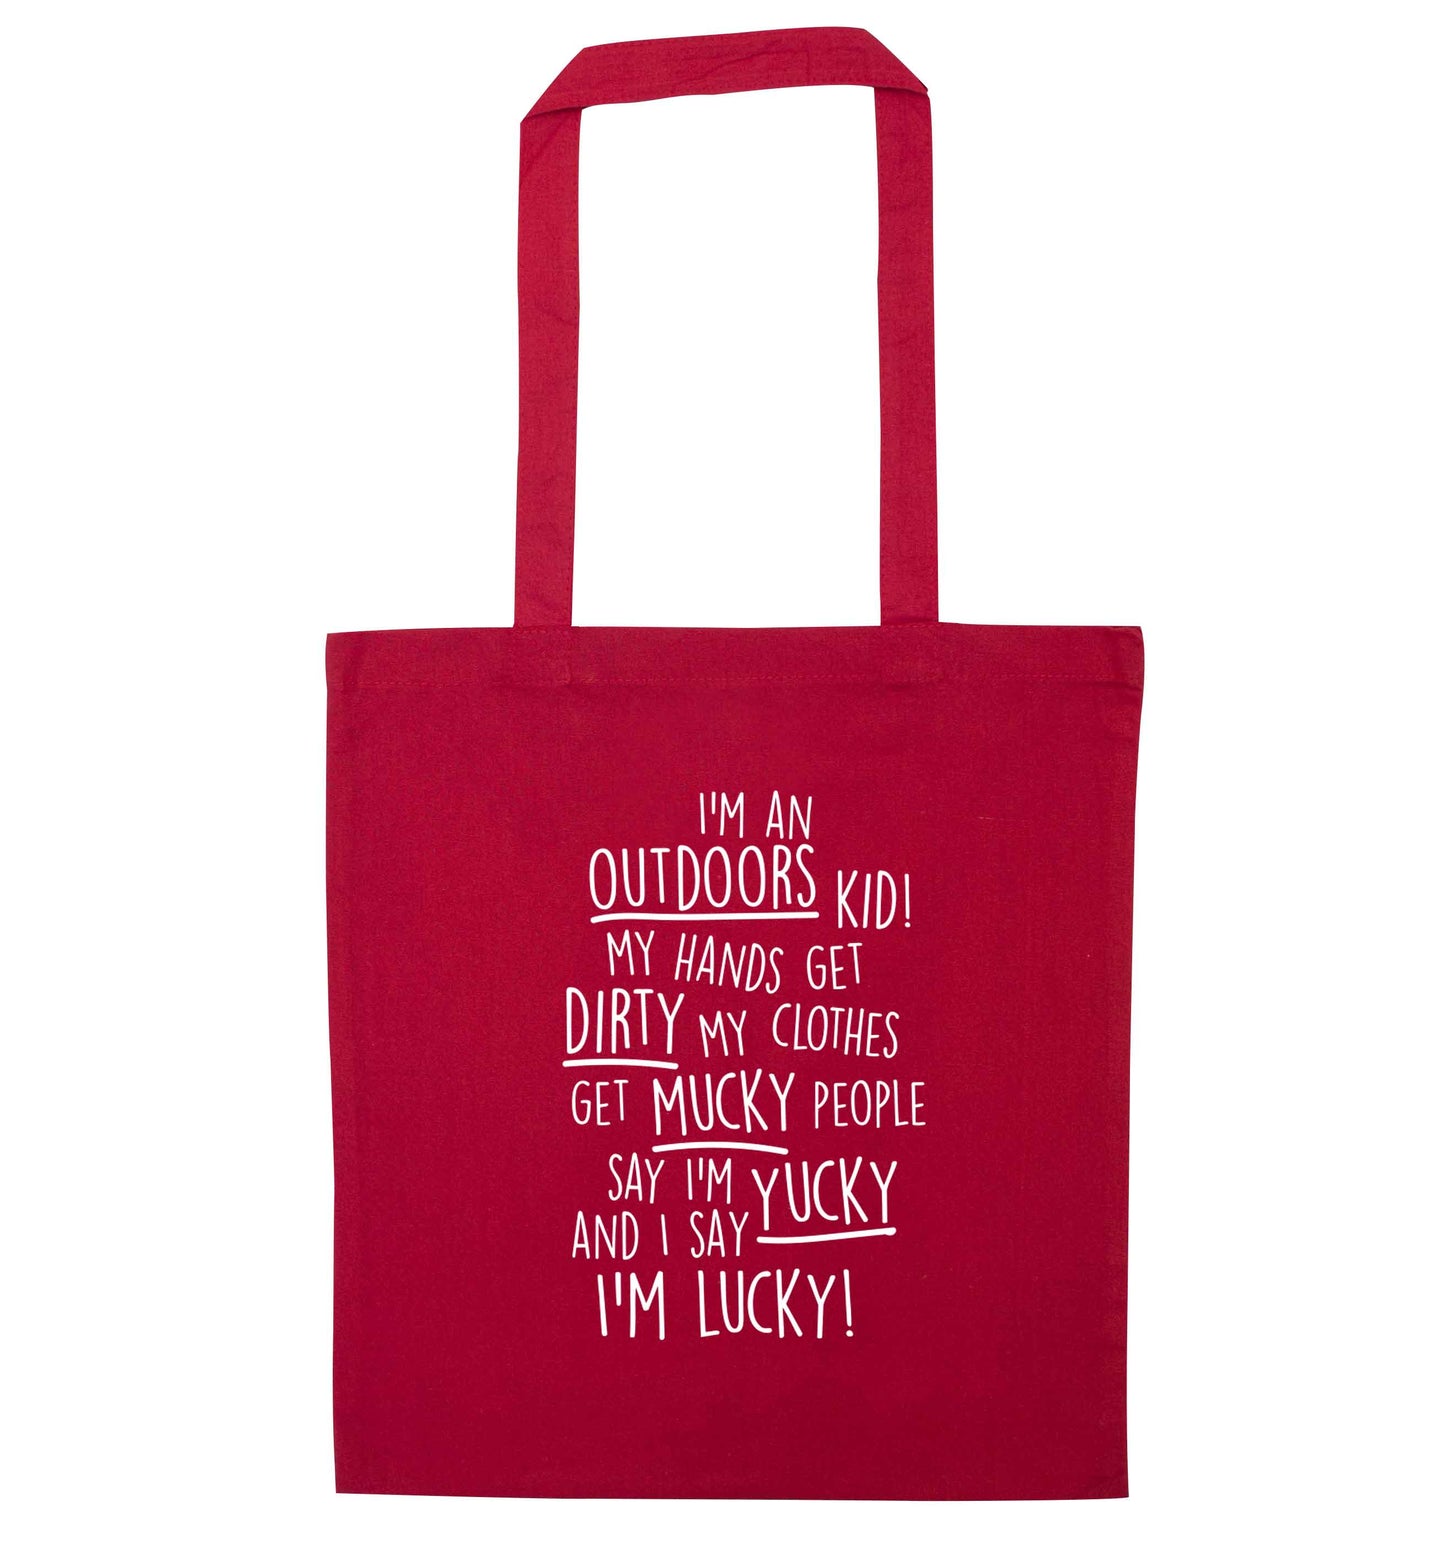 I'm an outdoors kid poem red tote bag